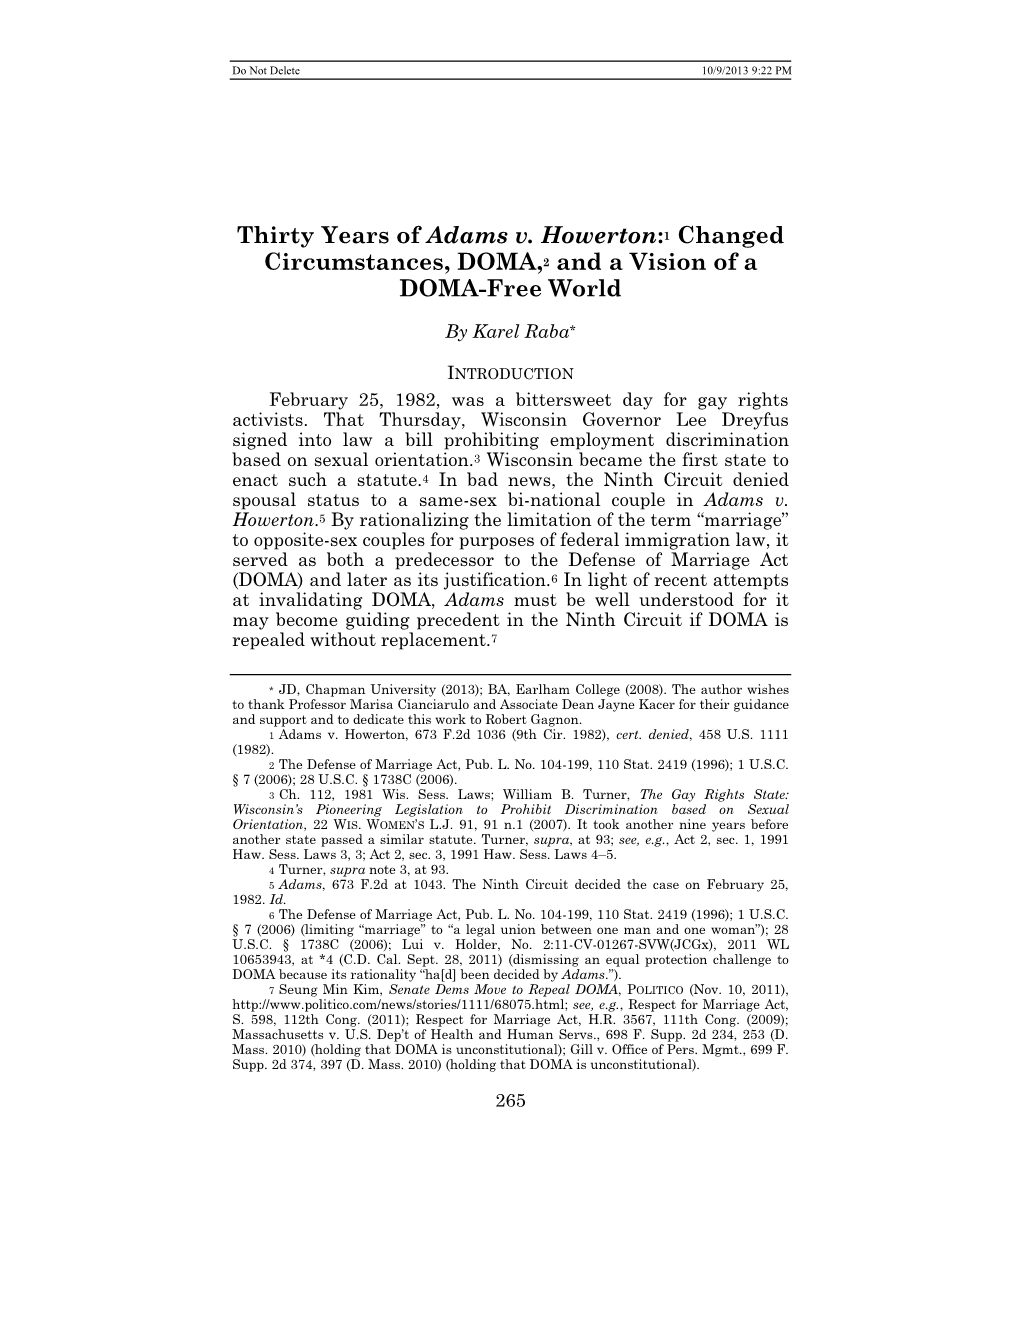 Thirty Years of Adams V. Howerton:1 Changed Circumstances, DOMA,2 and a Vision of a DOMA-Free World